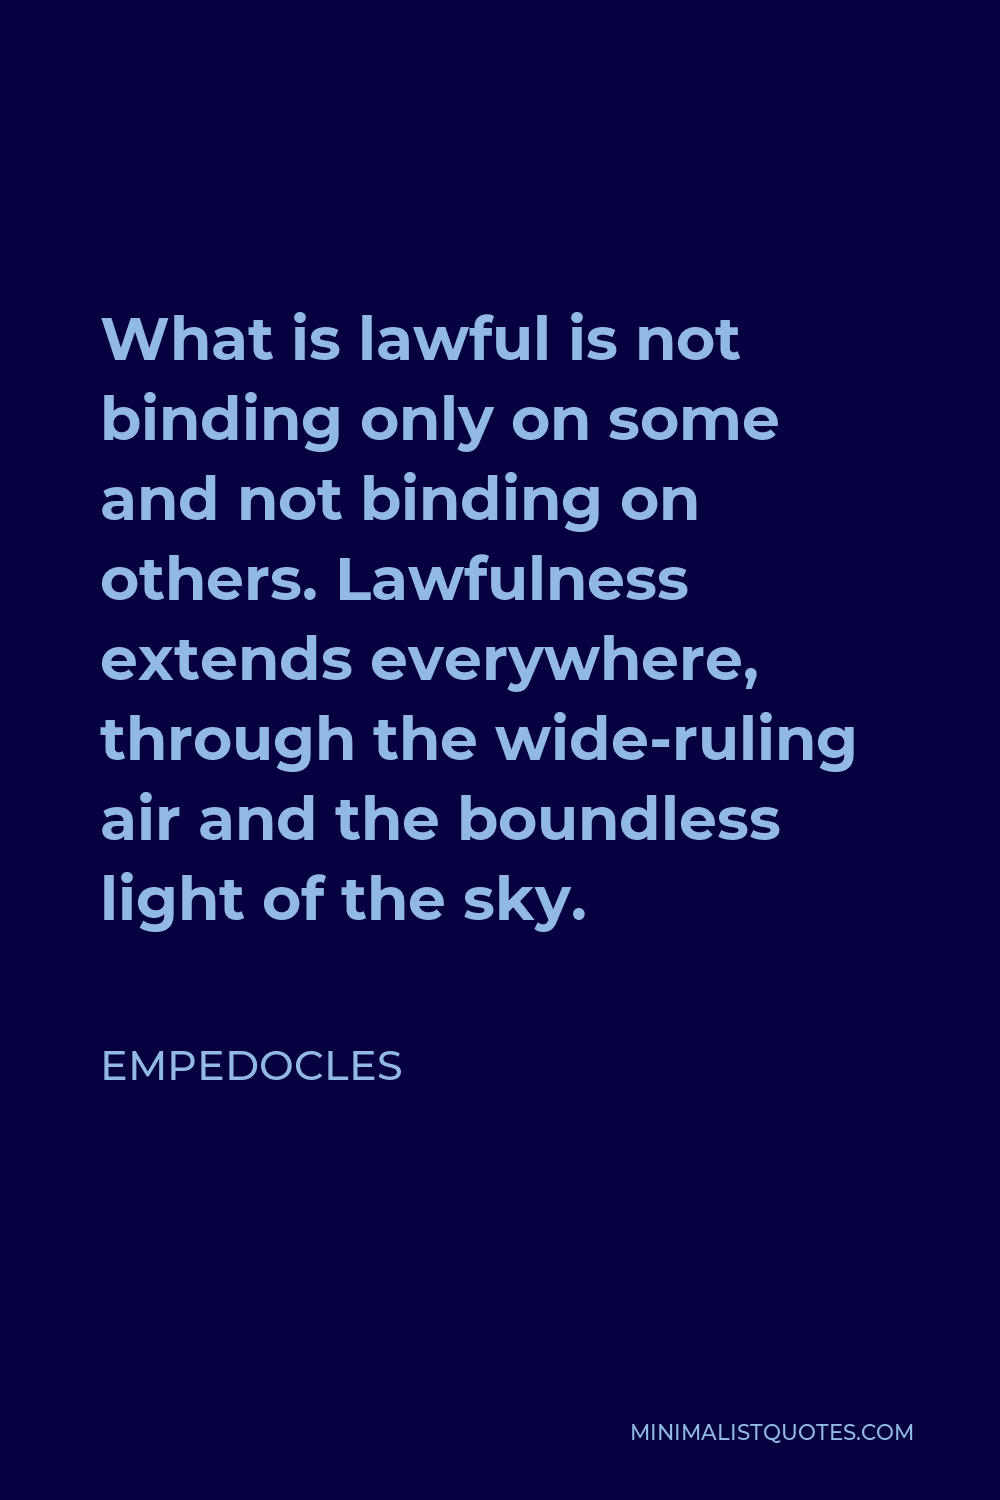 Empedocles Quote - What is lawful is not binding only on some and not binding on others. Lawfulness extends everywhere, through the wide-ruling air and the boundless light of the sky.